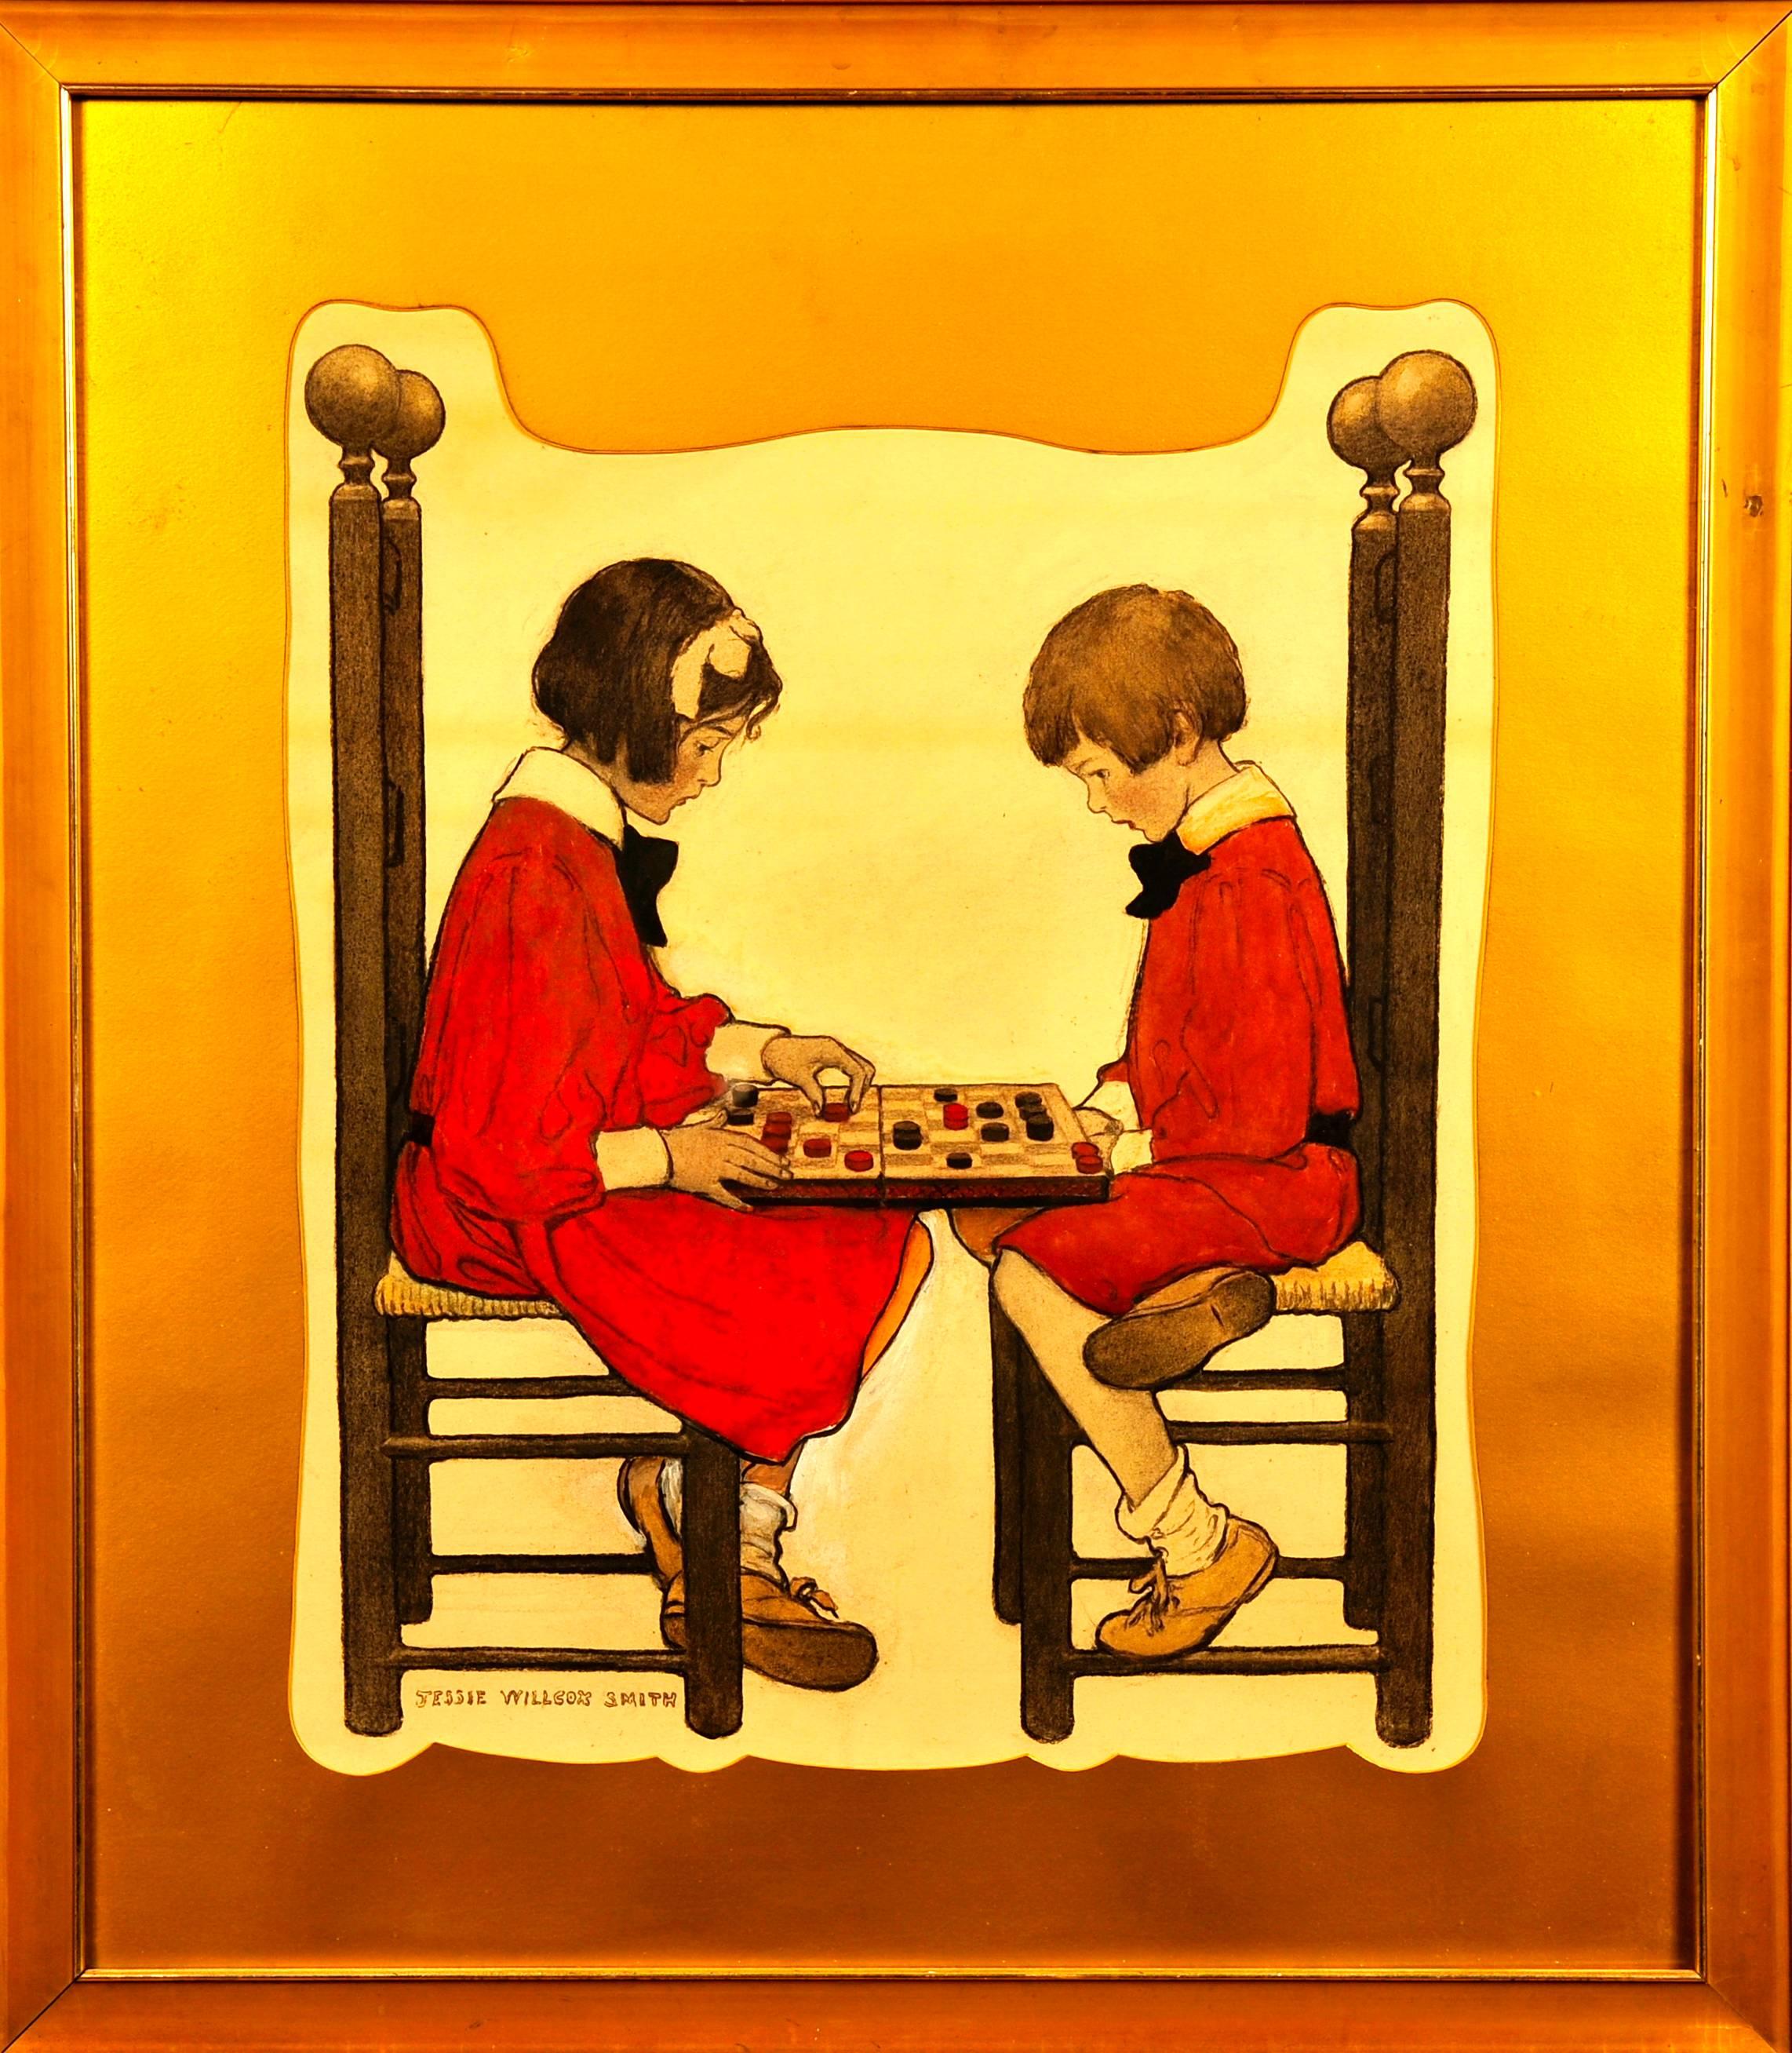 A Game of Checkers, Collier's Magazine Cover - Painting by Jessie Willcox Smith